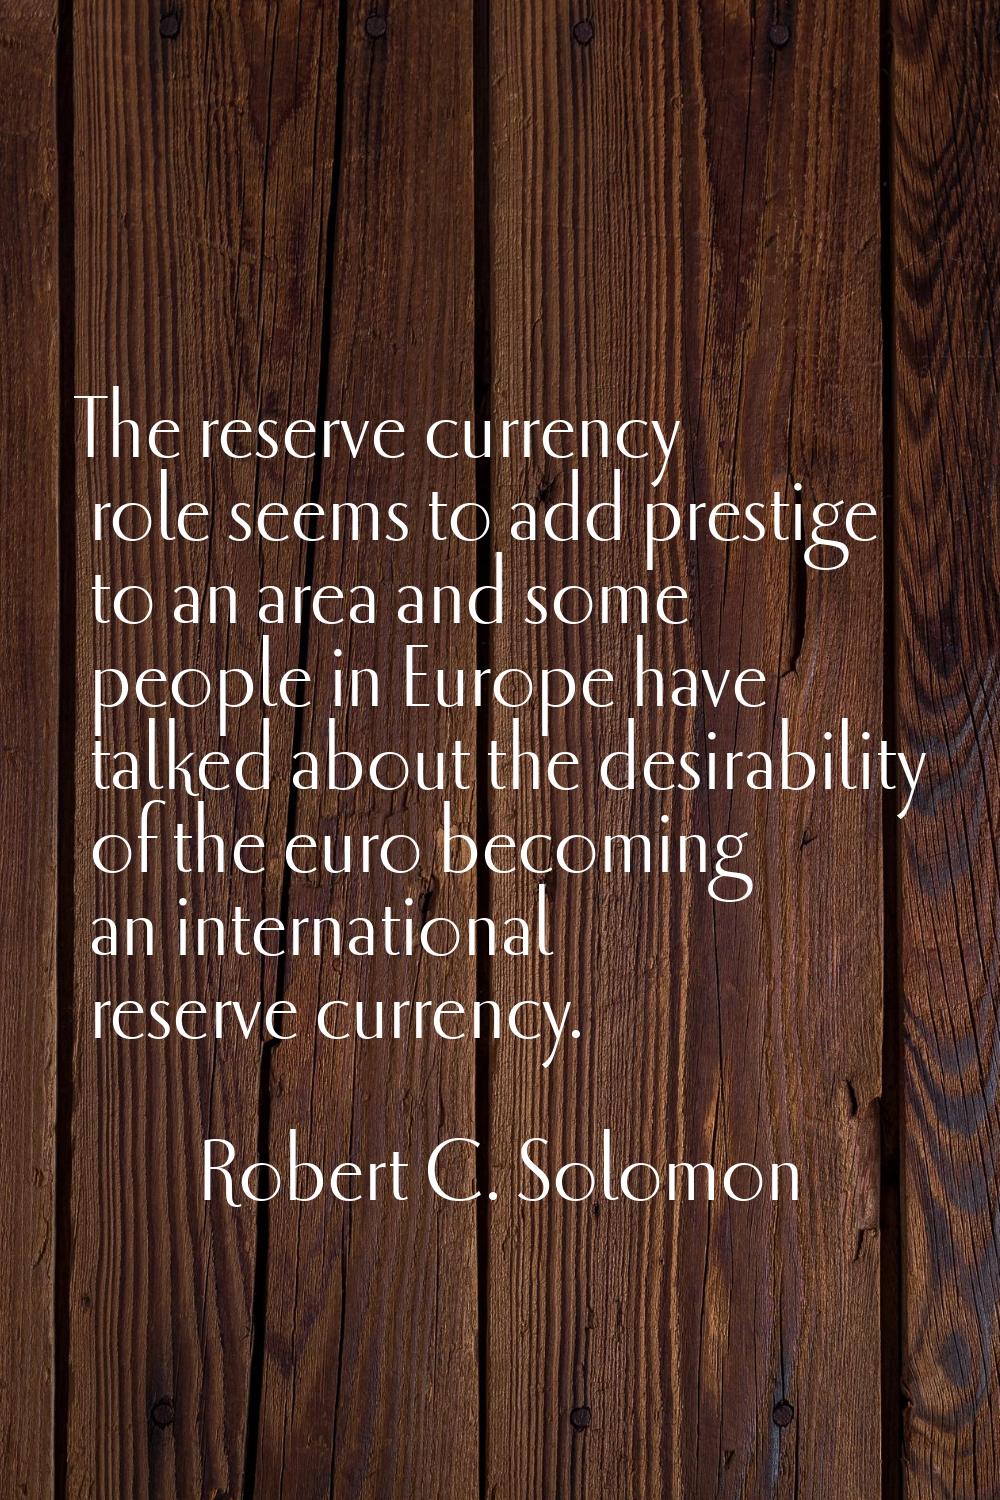 The reserve currency role seems to add prestige to an area and some people in Europe have talked ab